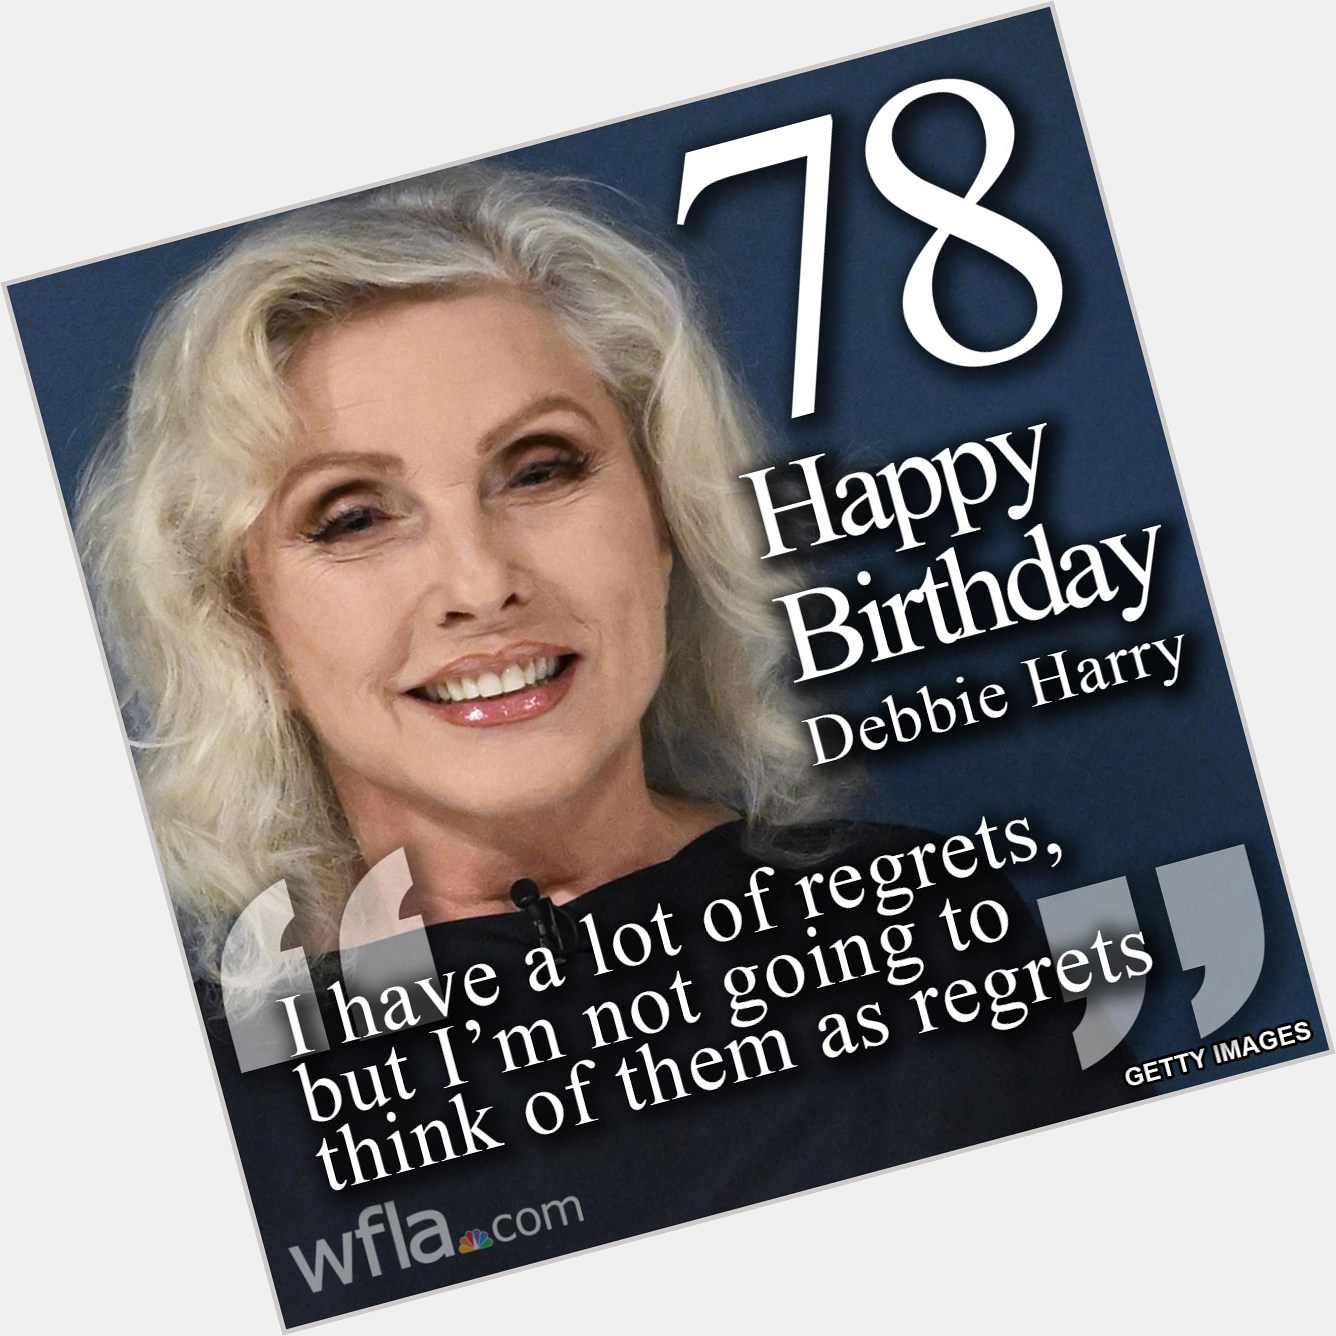 HAPPY BIRTHDAY, DEBBIE HARRY! The singer and Florida native is turning 78 today!  